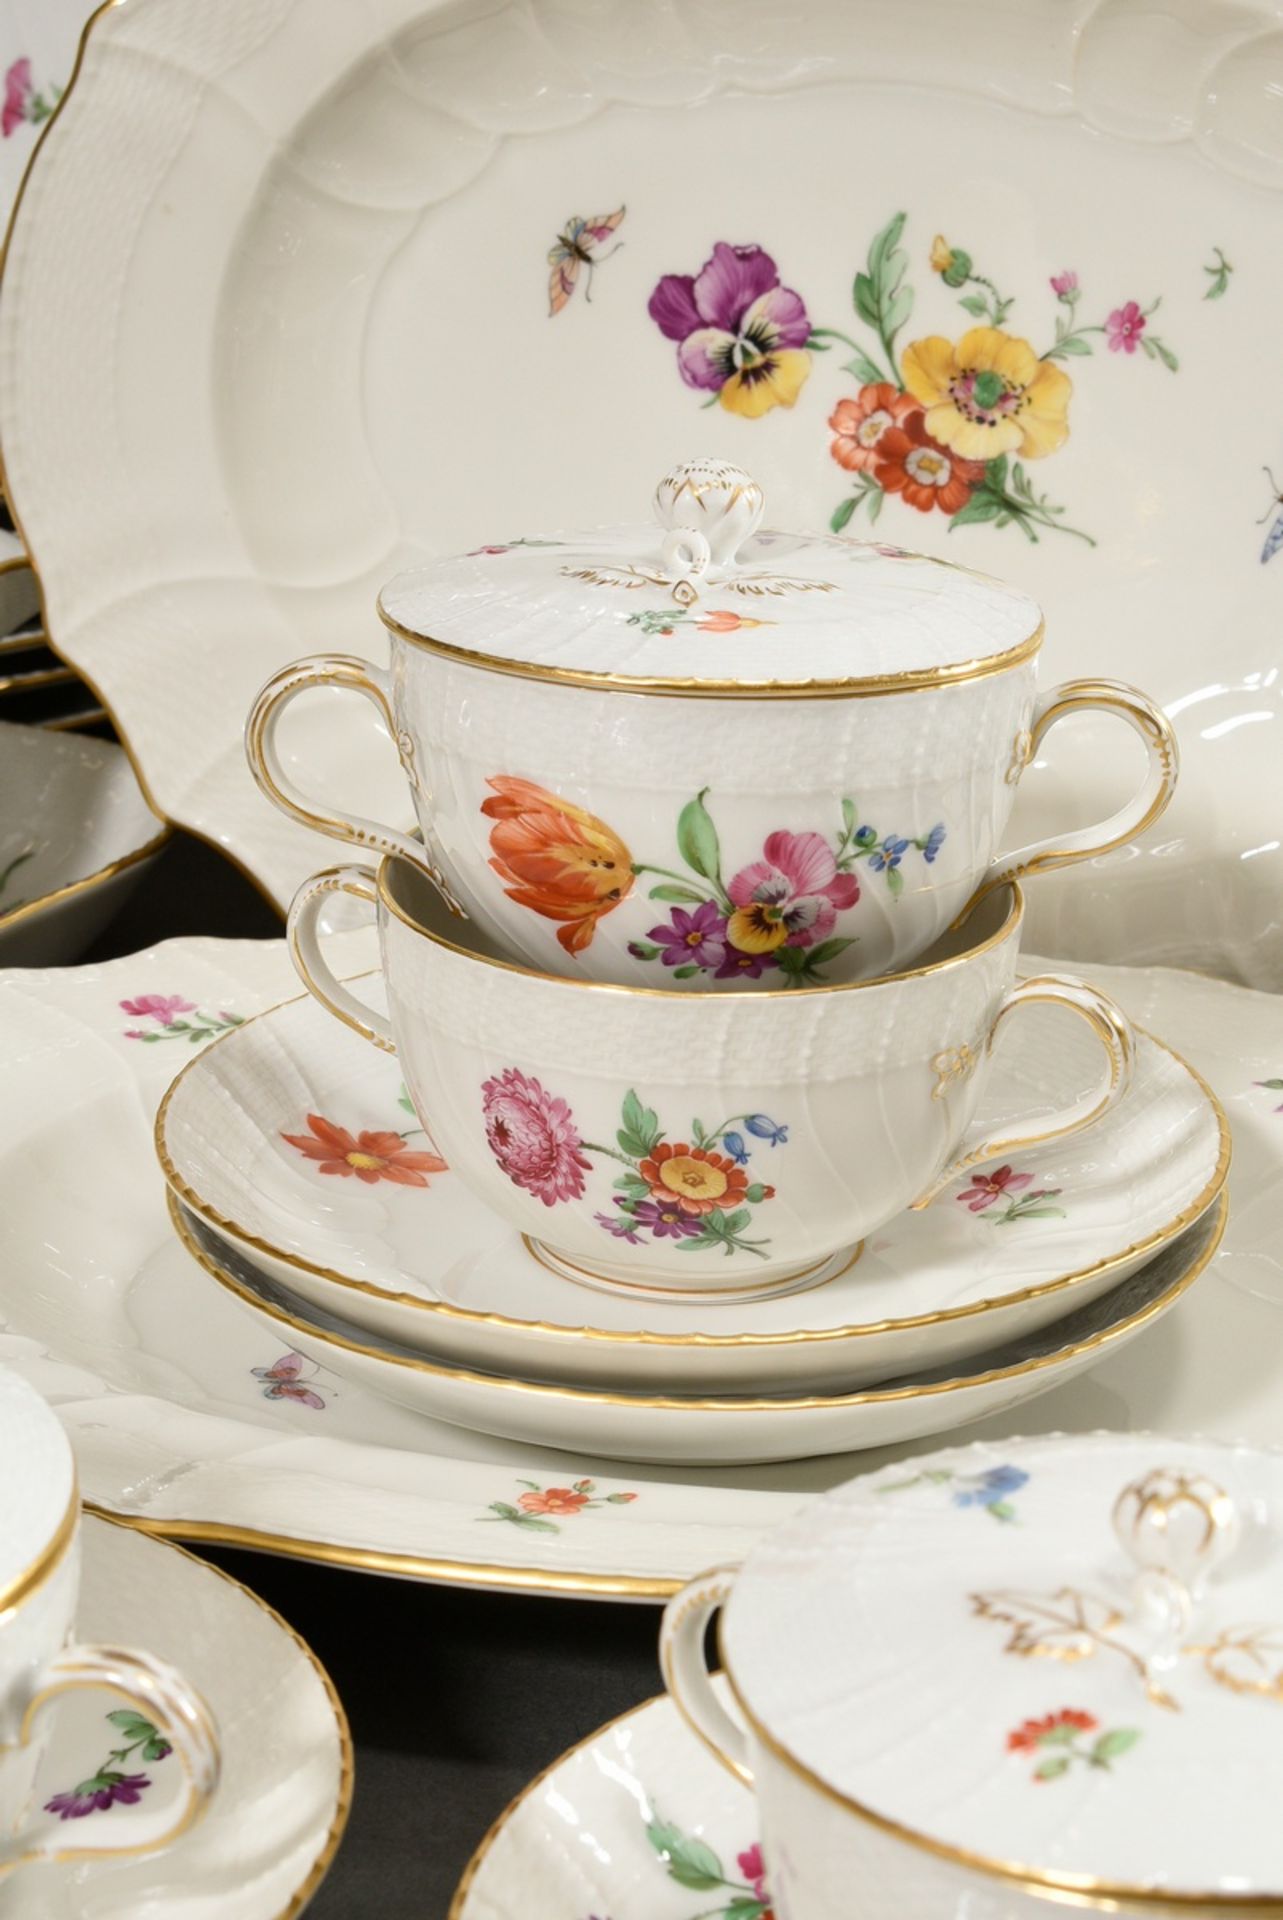 114 pieces KPM dinner service "Neuosier" with polychrome painting "flowers and insects" consisting  - Image 6 of 14